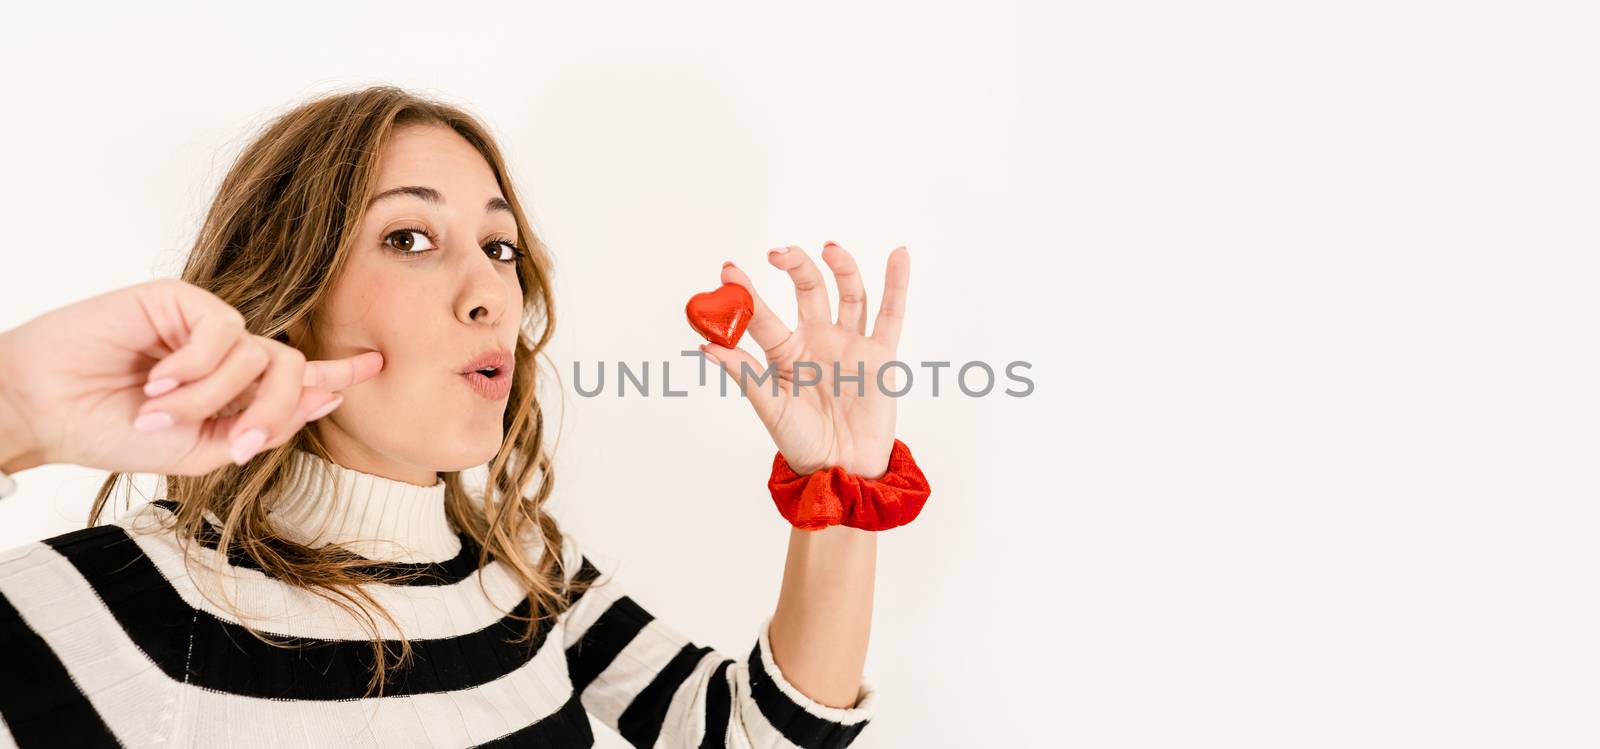 Head and shoulders close up of a blonde cute excited woman looking at the camera holding a heart-shaped chocolate between your fingers and gluttony expression - Chocolate: symbol of sin and temptation